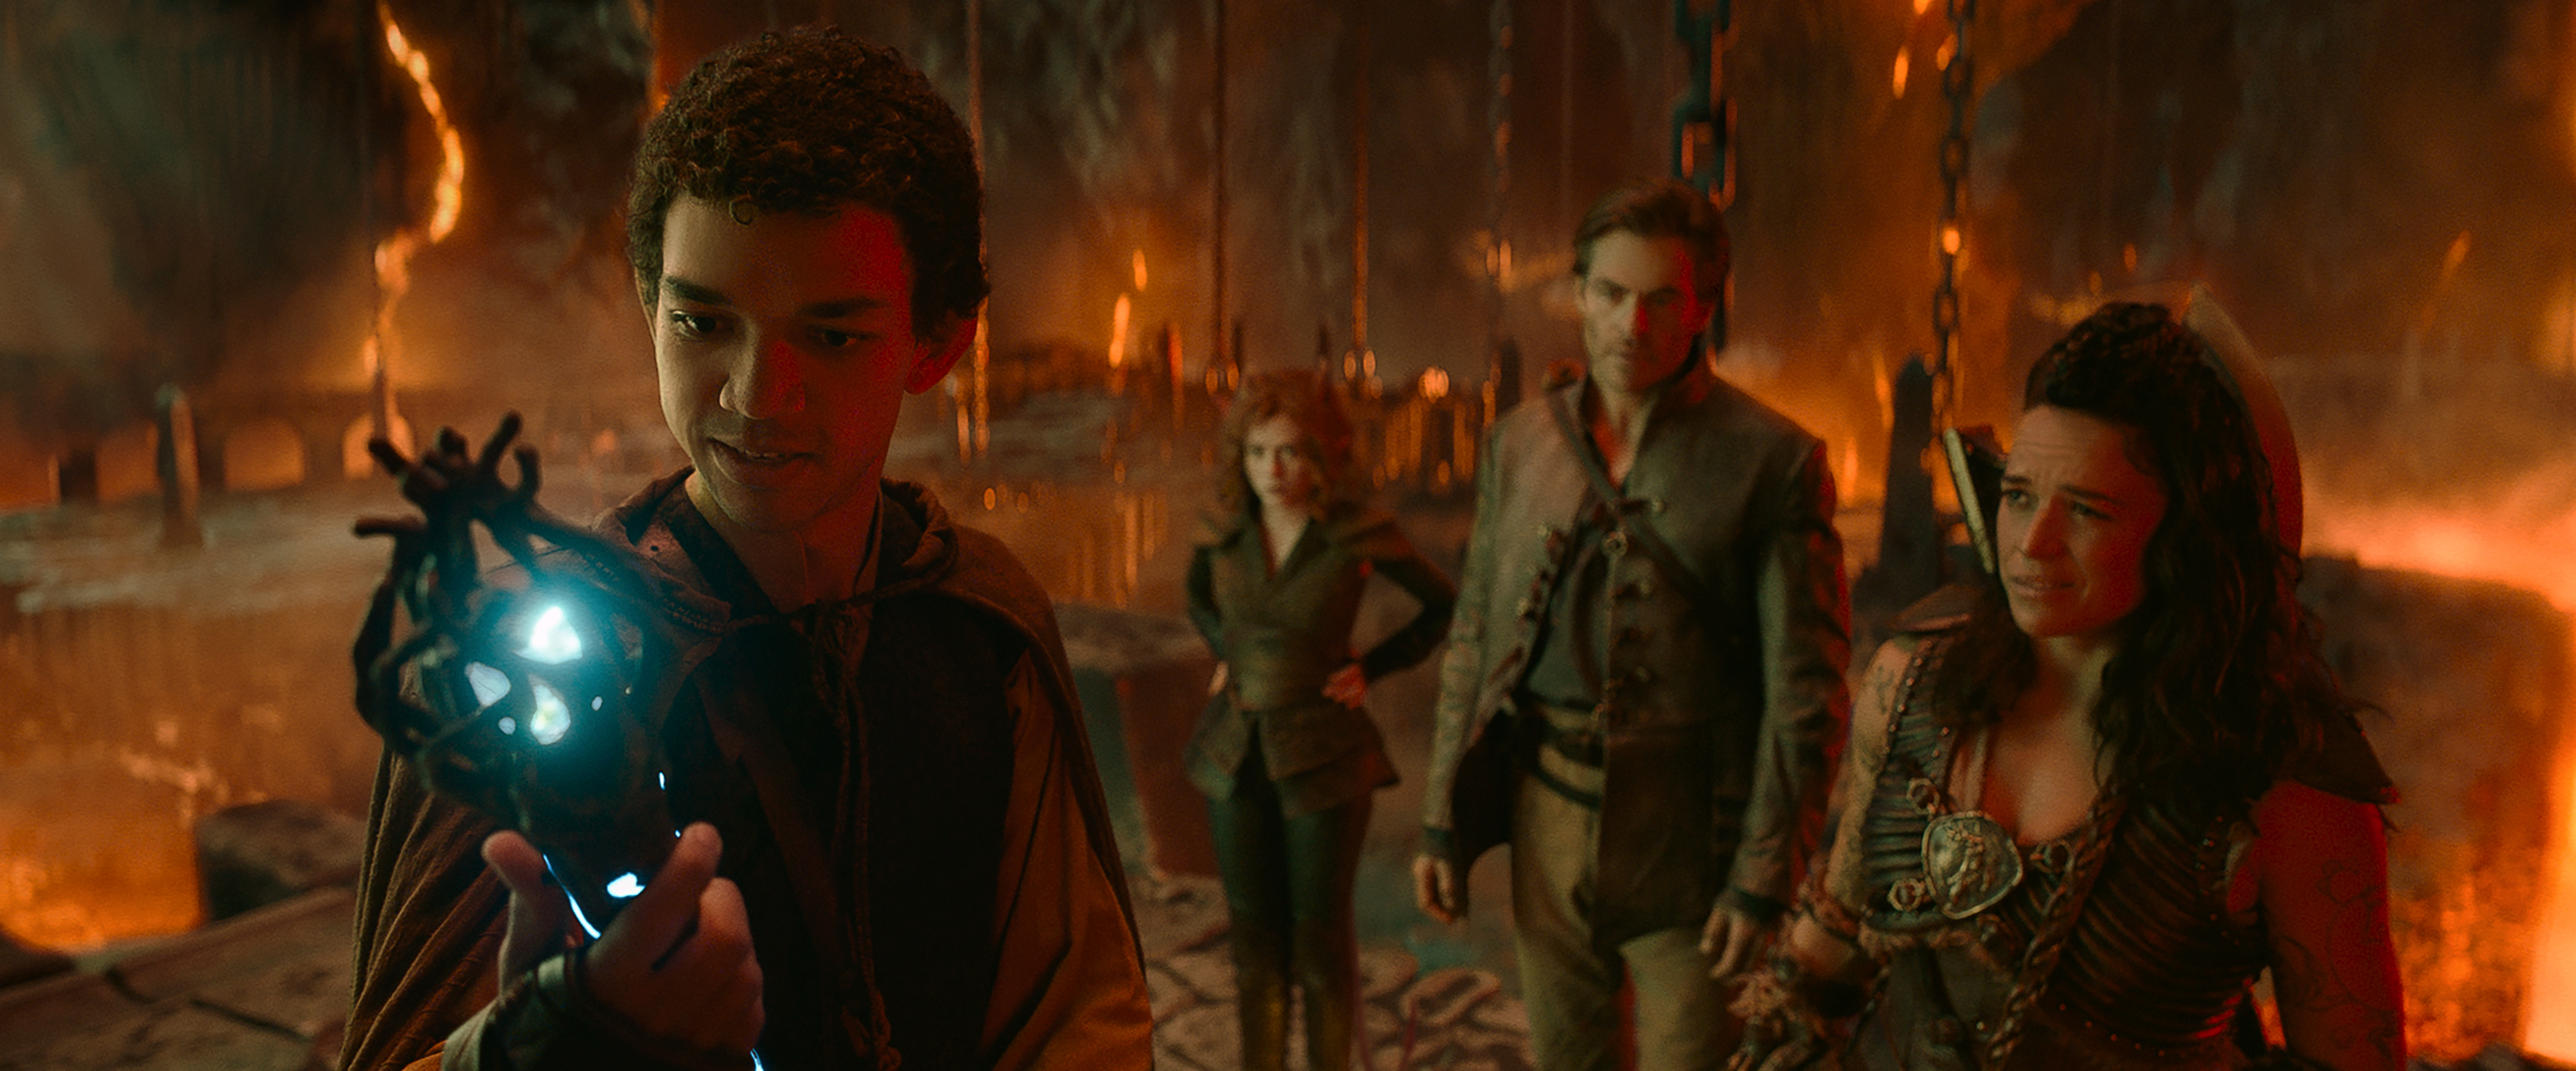 Justice Smith plays Simon, Sophia Lillis plays Doric, Michelle Rodriguez plays Holga and Chris Pine plays Edgin in 'Dungeons & Dragons: Honor Among Thieves'. Image: Paramount Pictures / eOne / Supplied